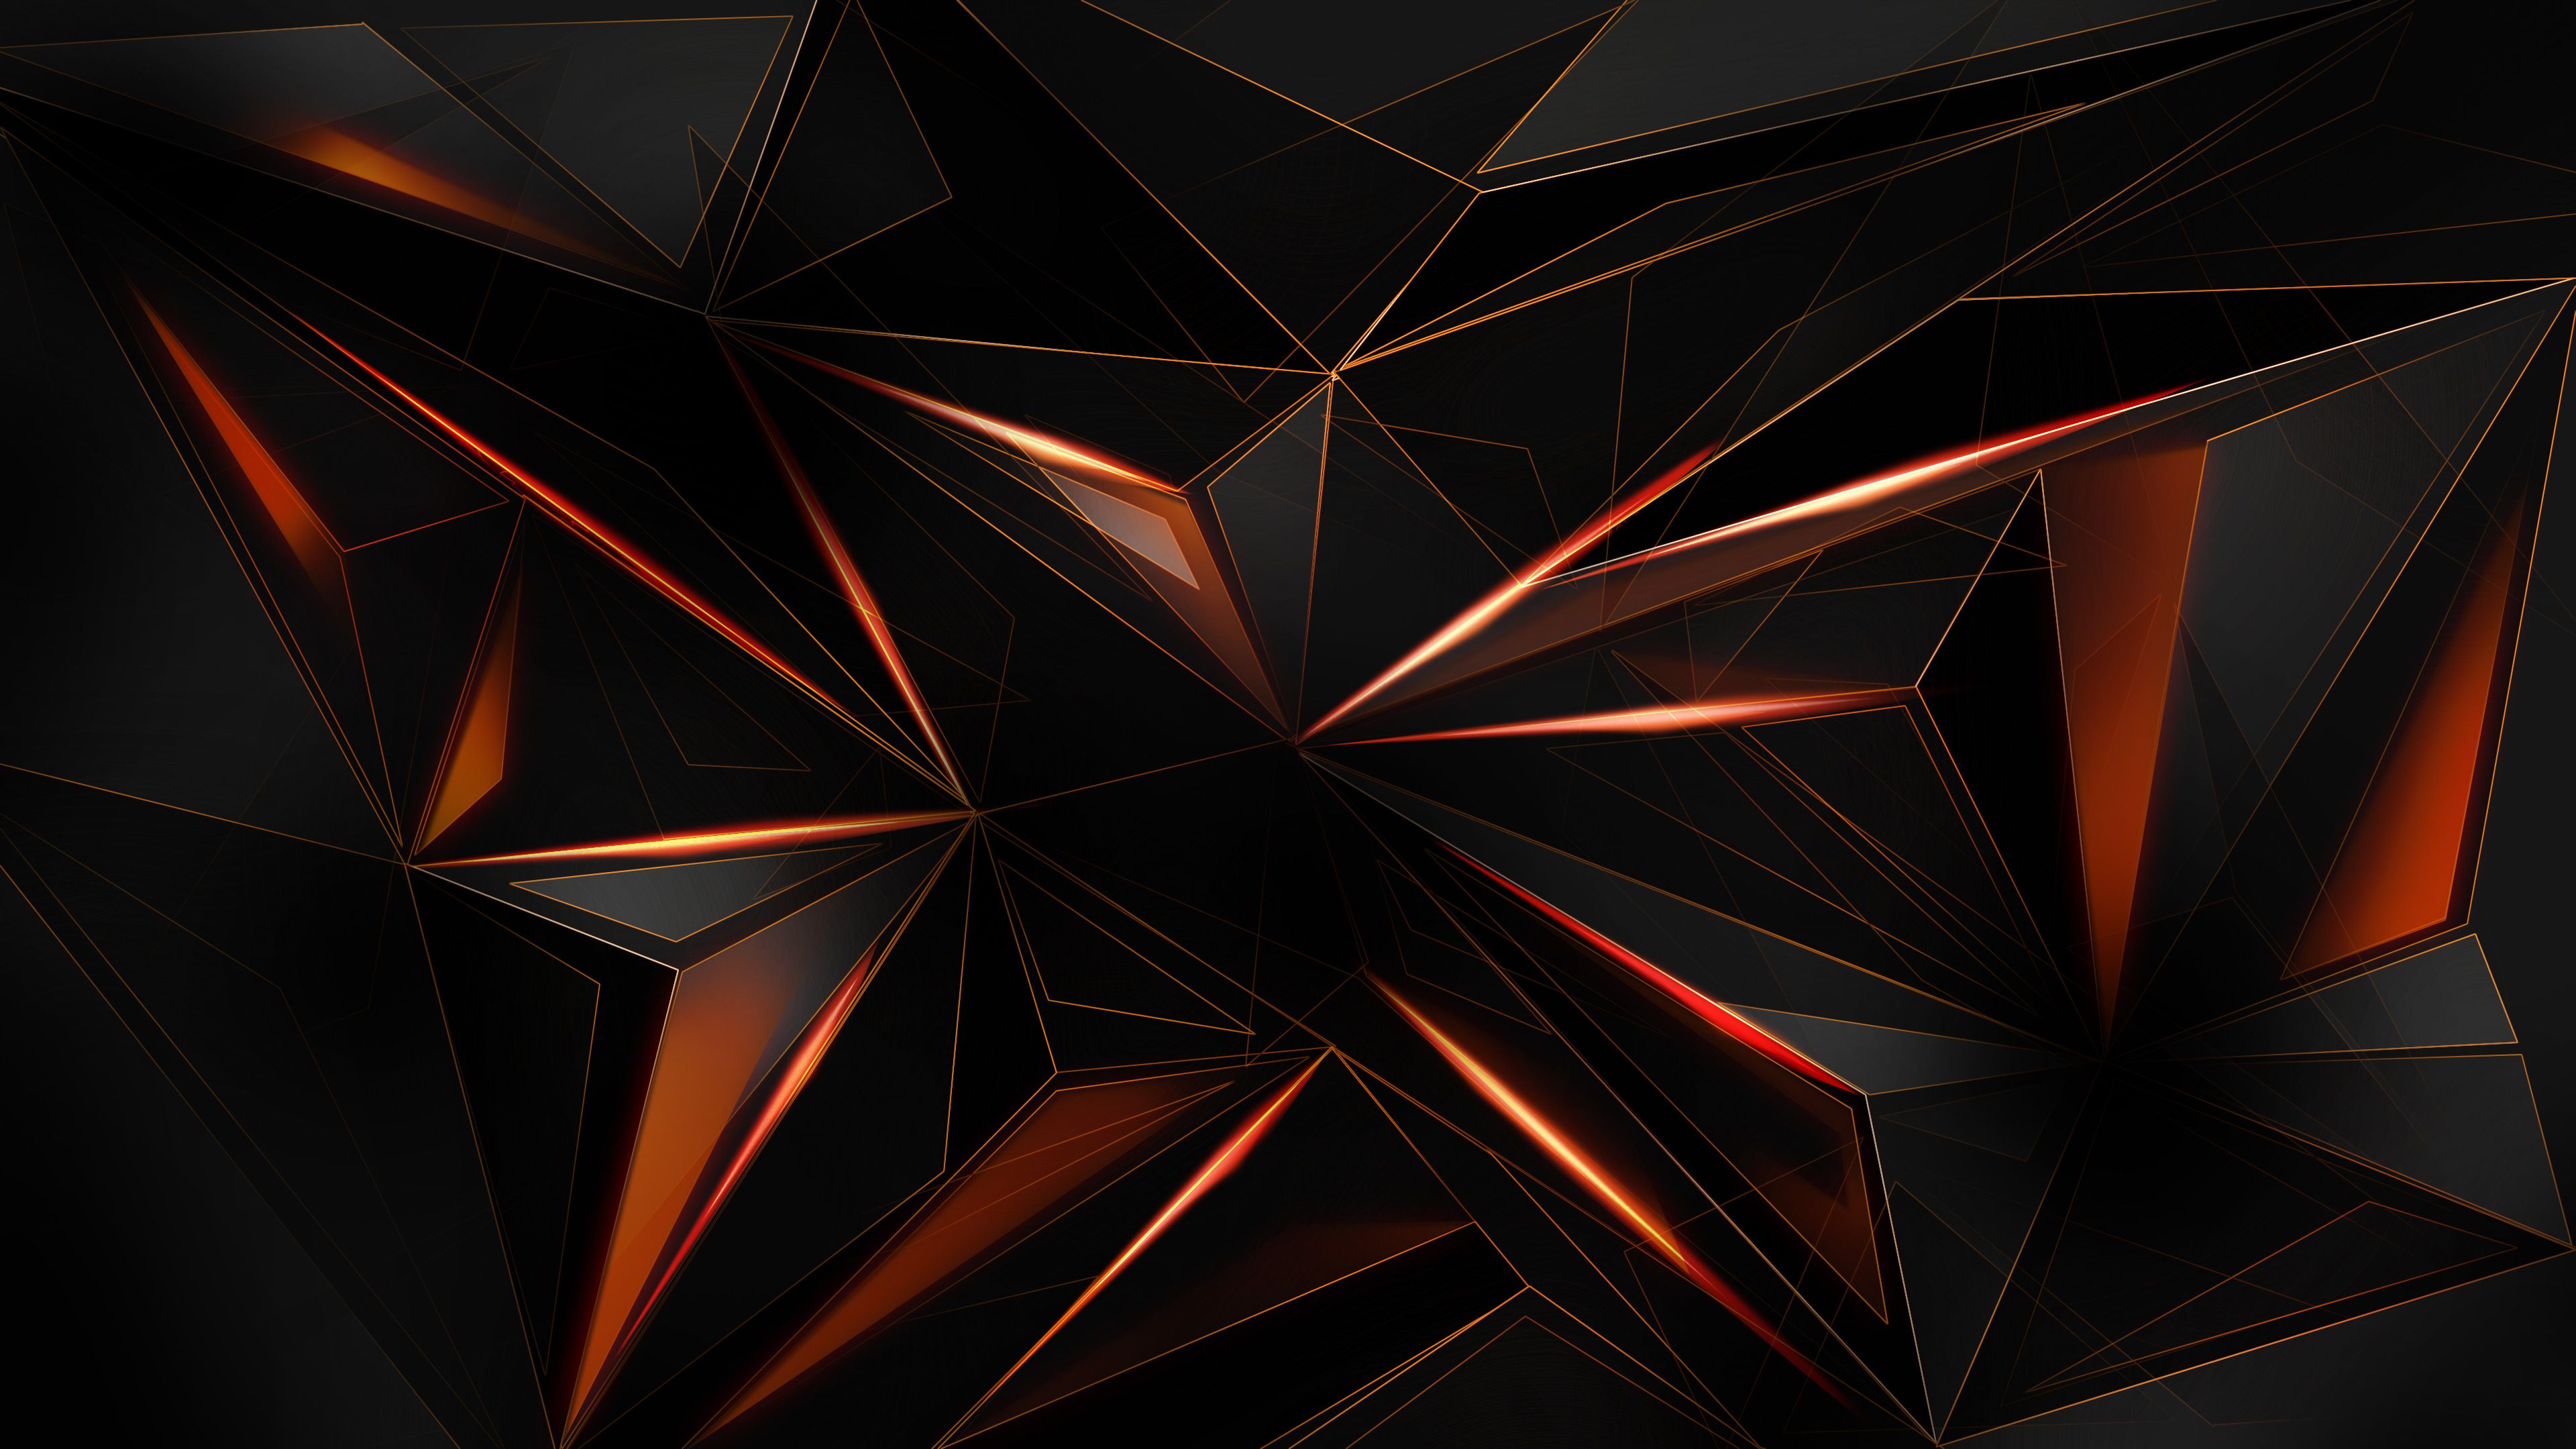 Abstract Shapes 4K 2021 Hd Wallpapers